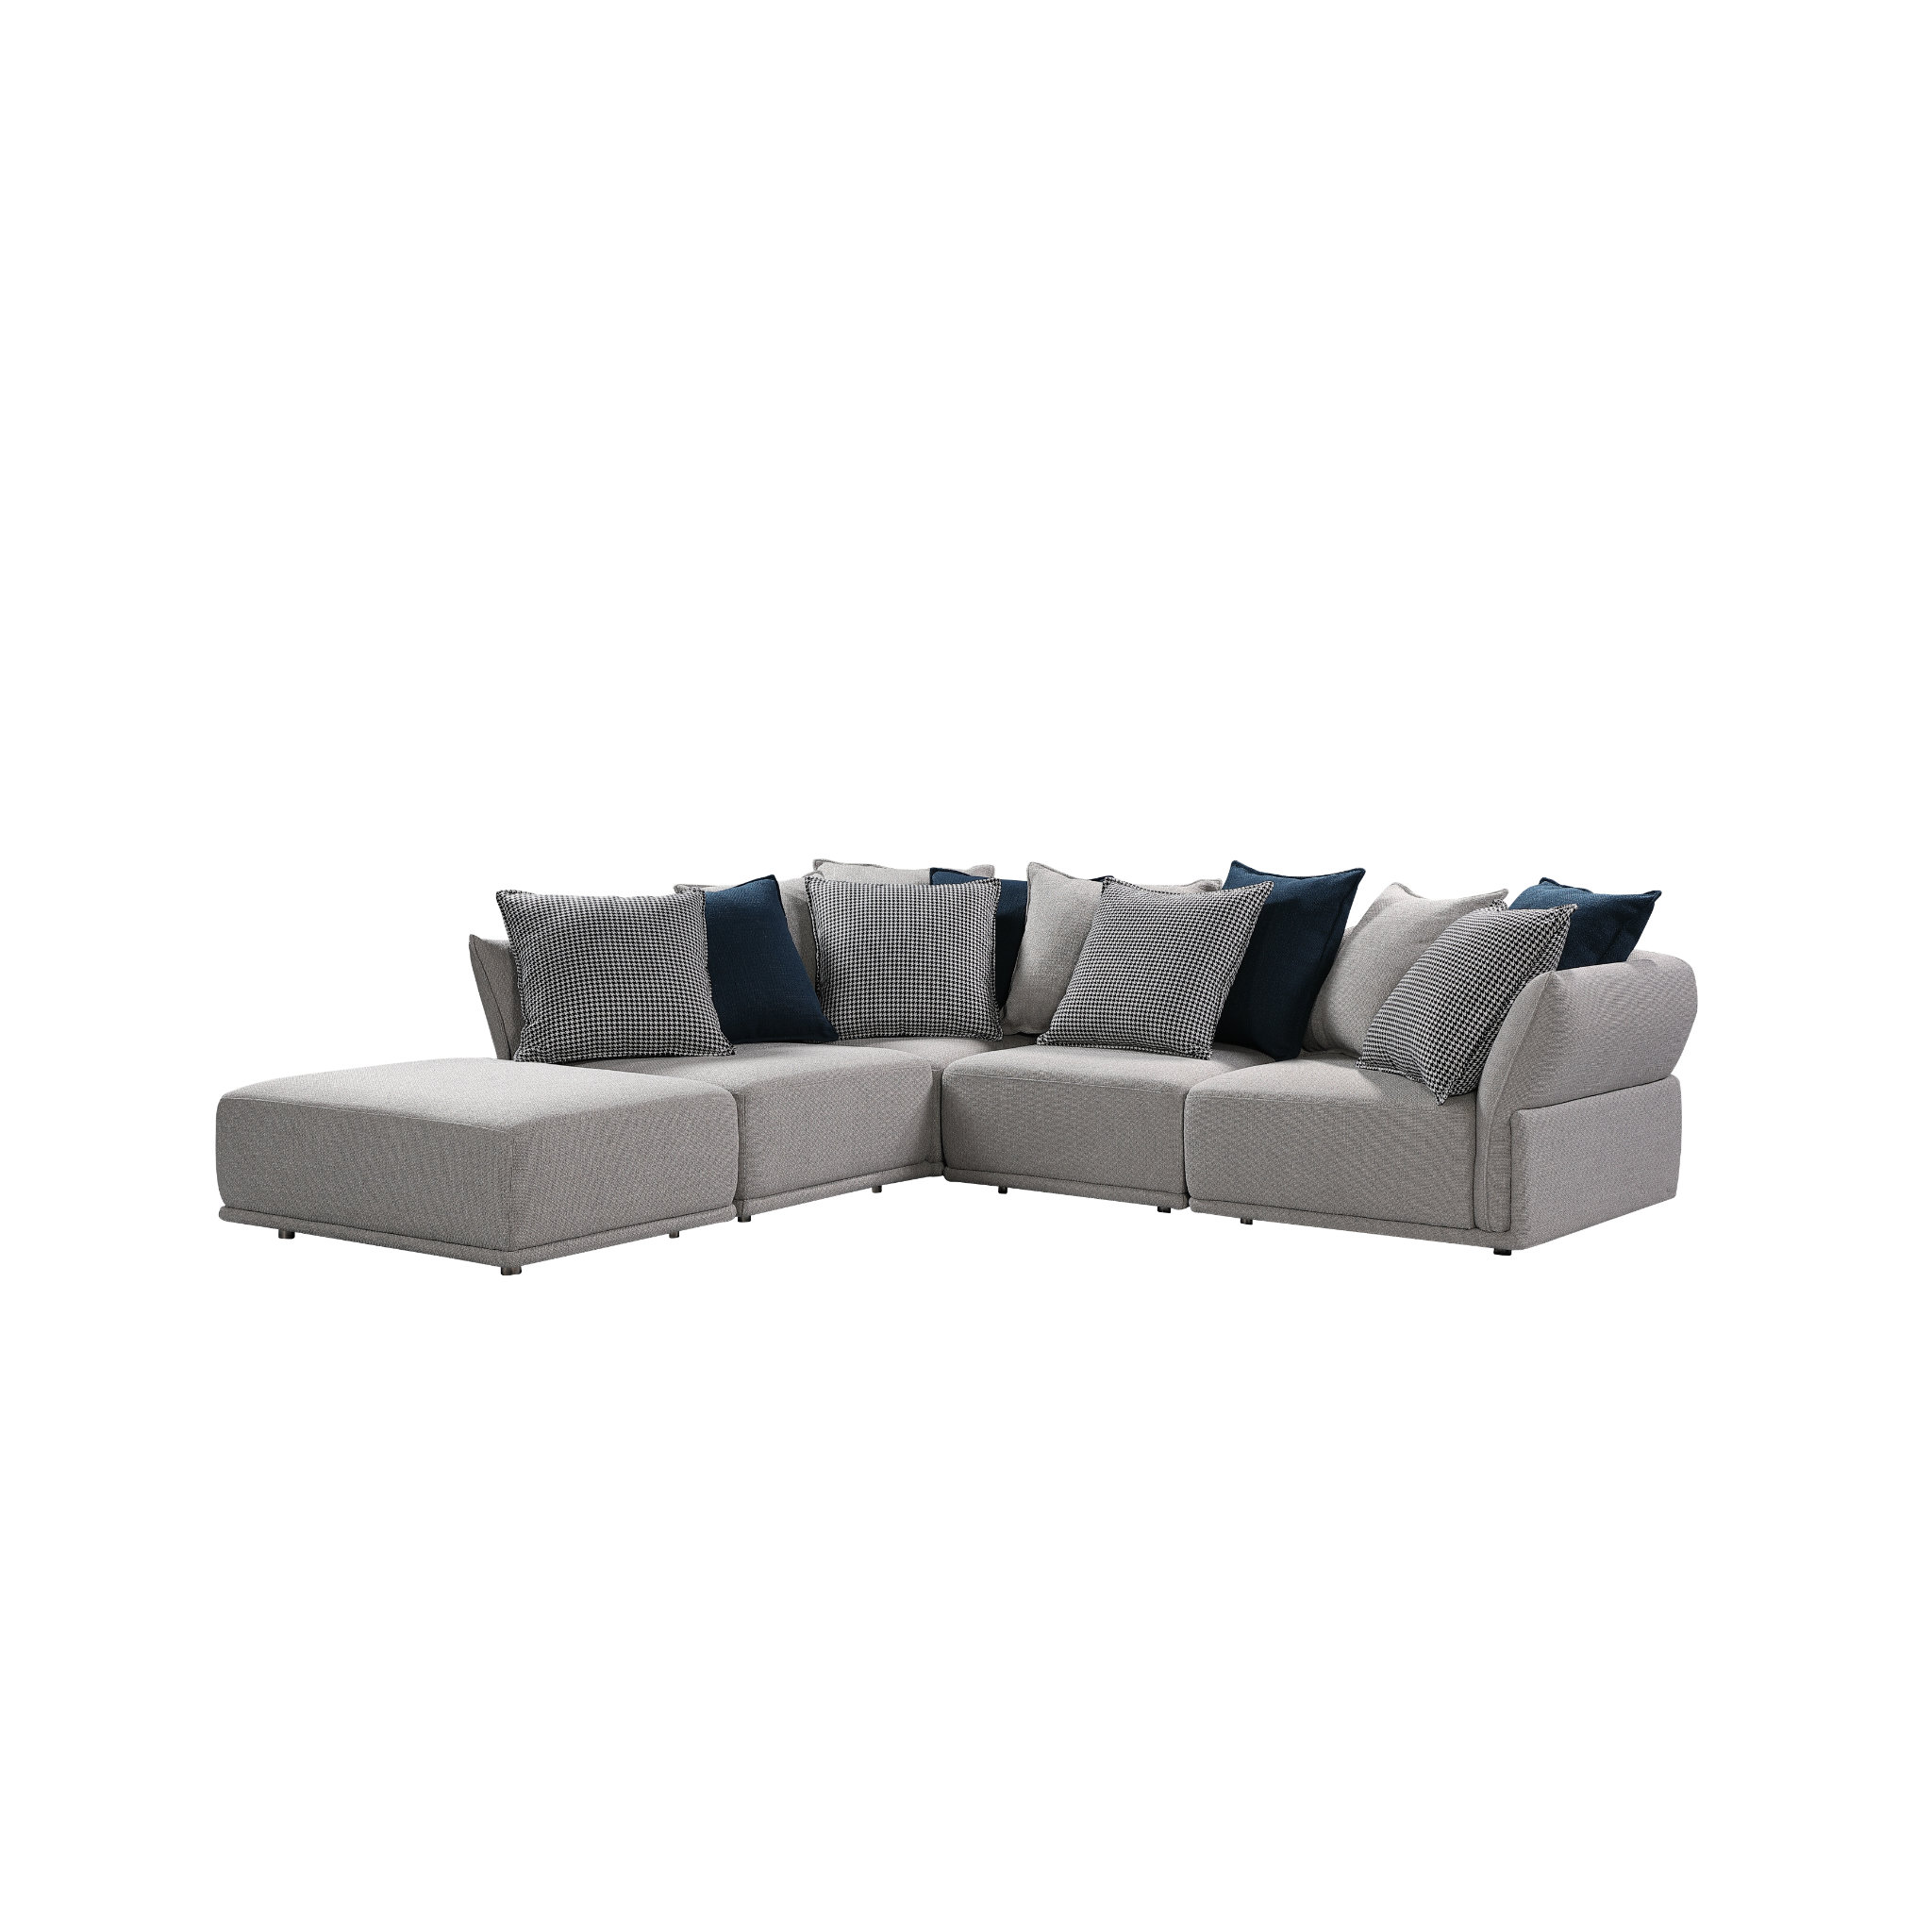 Couches engagées - Taille 5 - CHANGE NOW !